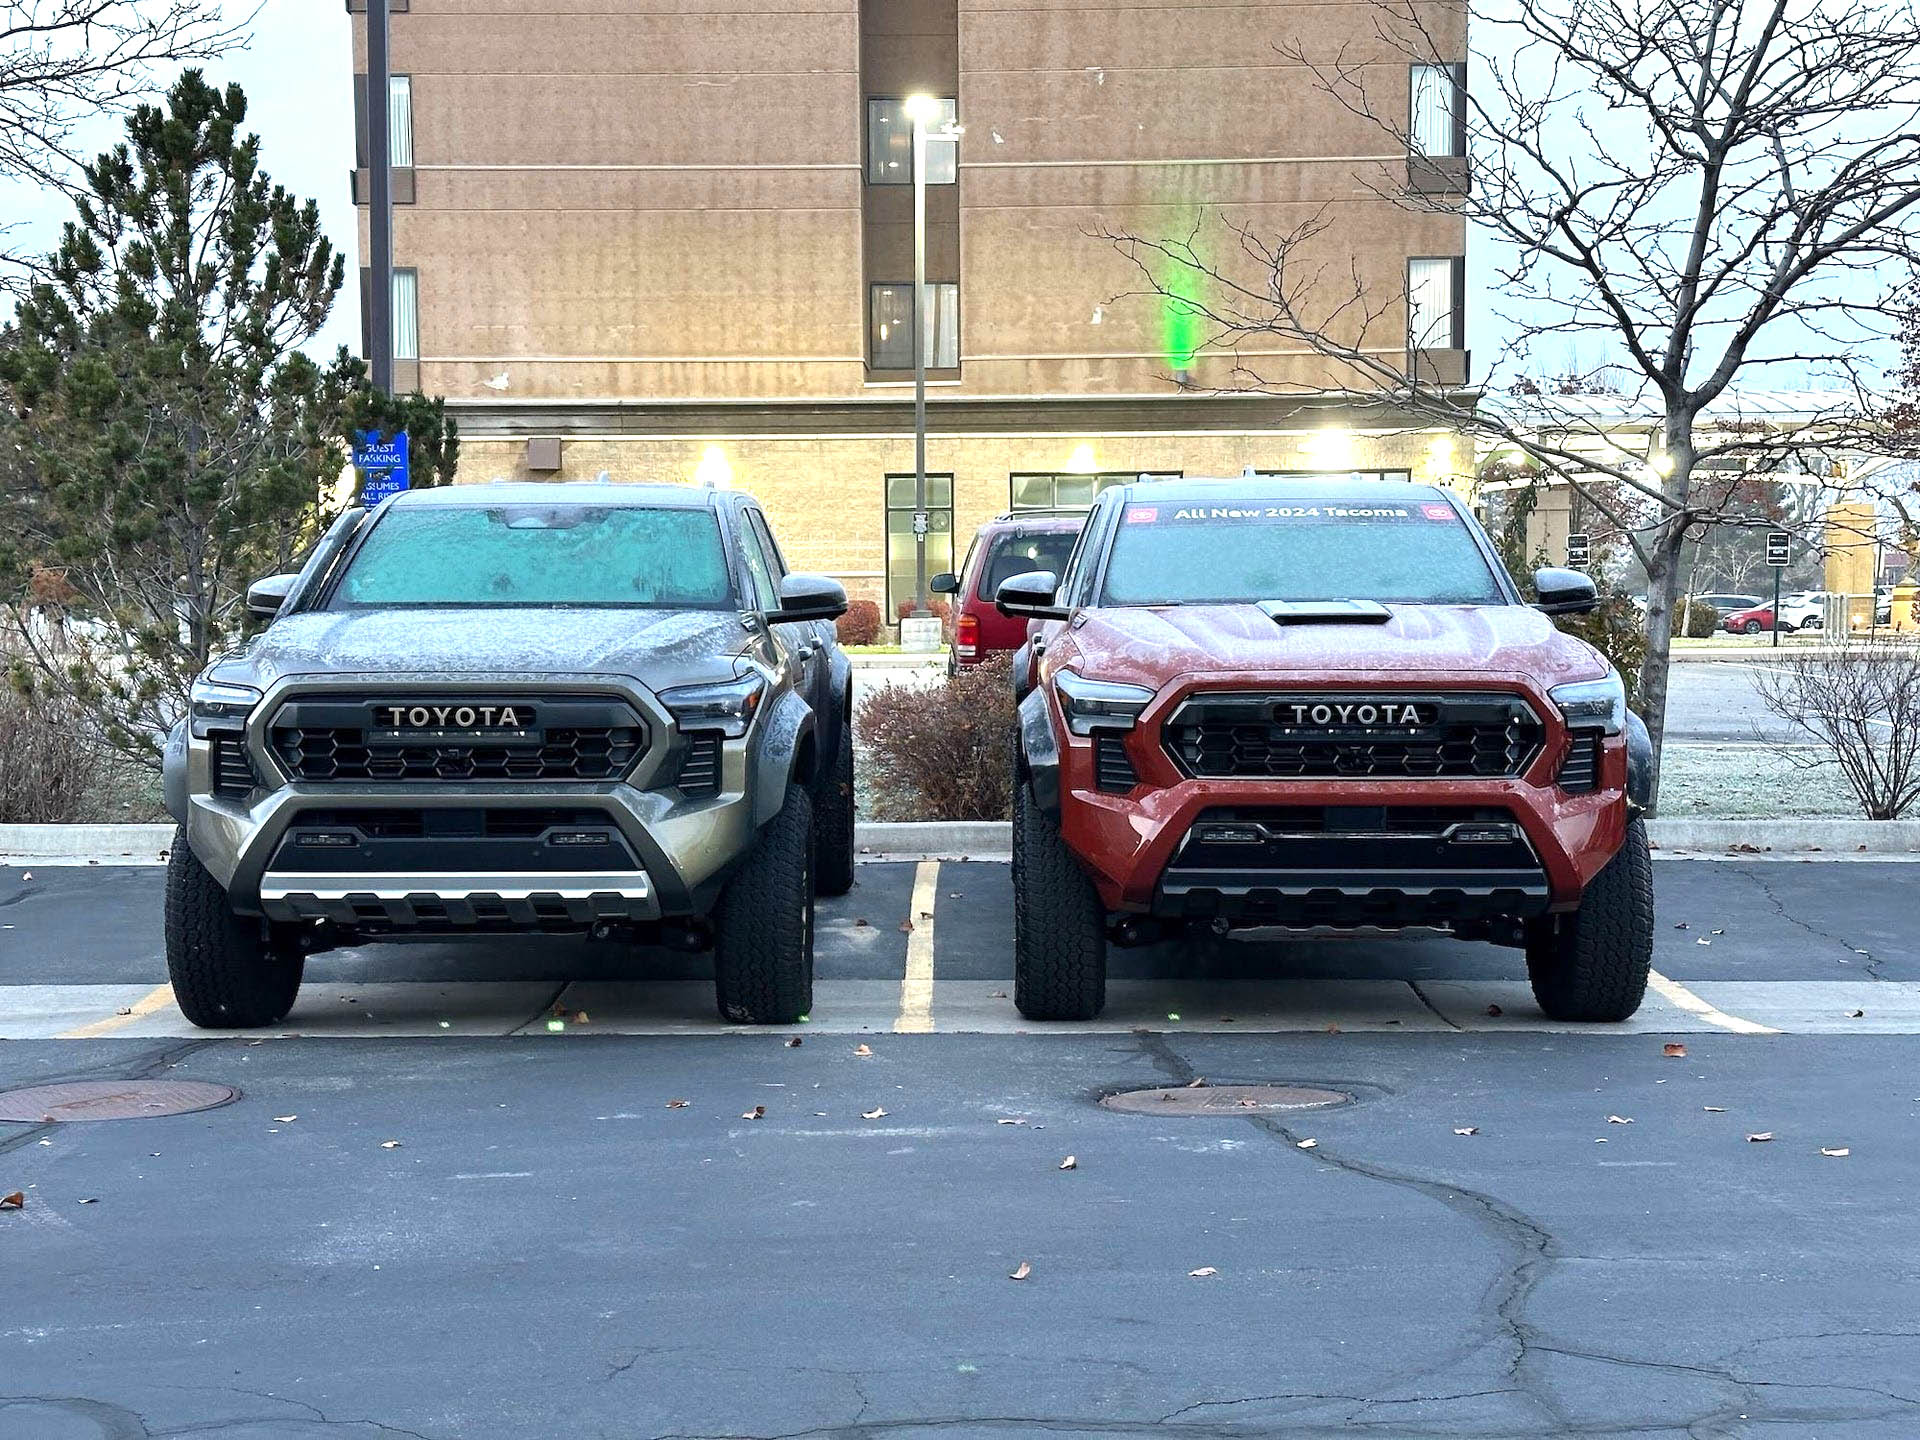 2024 Tacoma Official BRONZE OXIDE 2024 Tacoma Thread (4th Gen) 2024 Tacoma TRD Pro Terra and Trailhunter Bronze oxide side by side 14